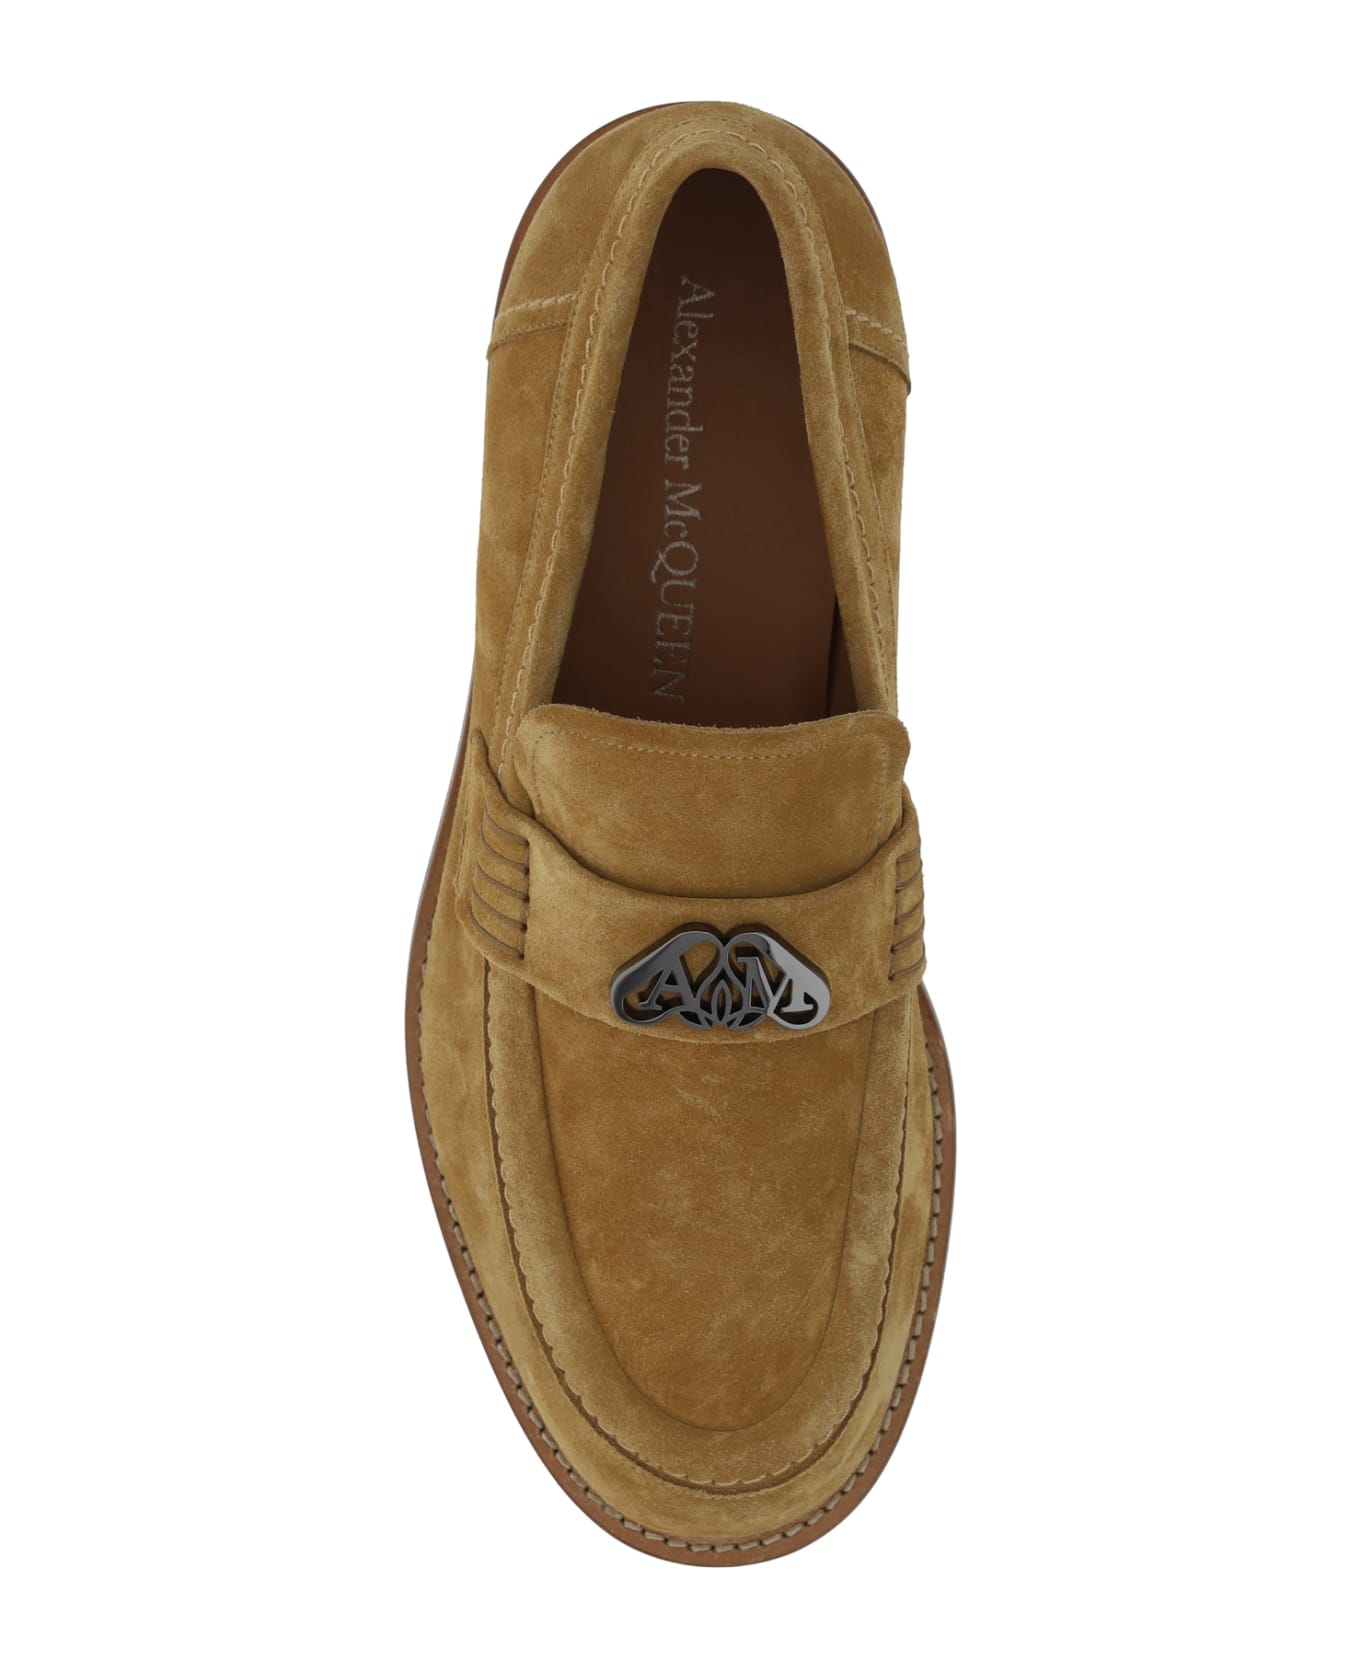 Alexander McQueen Loafers With Logo Detail In Suede Man - Cigar/cuoio/gunmetal ローファー＆デッキシューズ